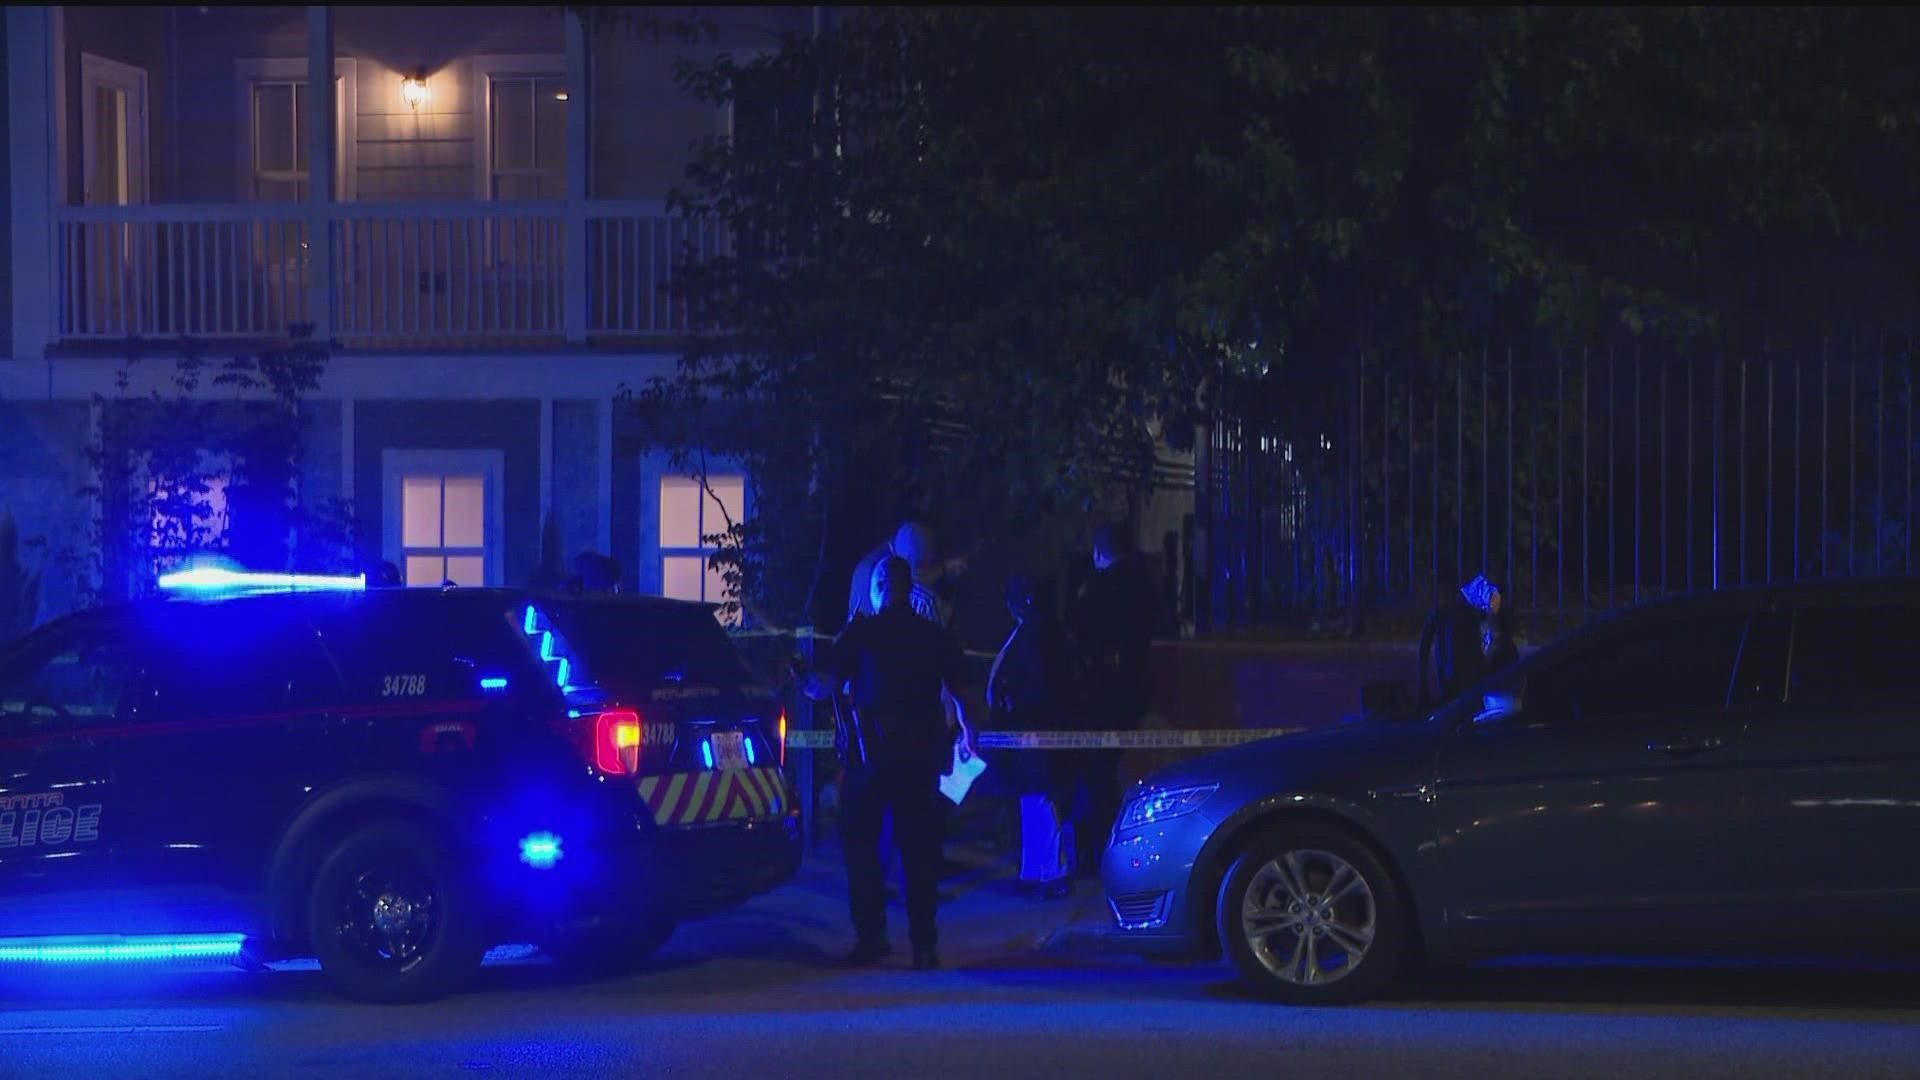 Officers responded to a call of a person shot around 9:12 p.m. When they arrived, they found a man who they pronounced dead on the scene from a gunshot wound.